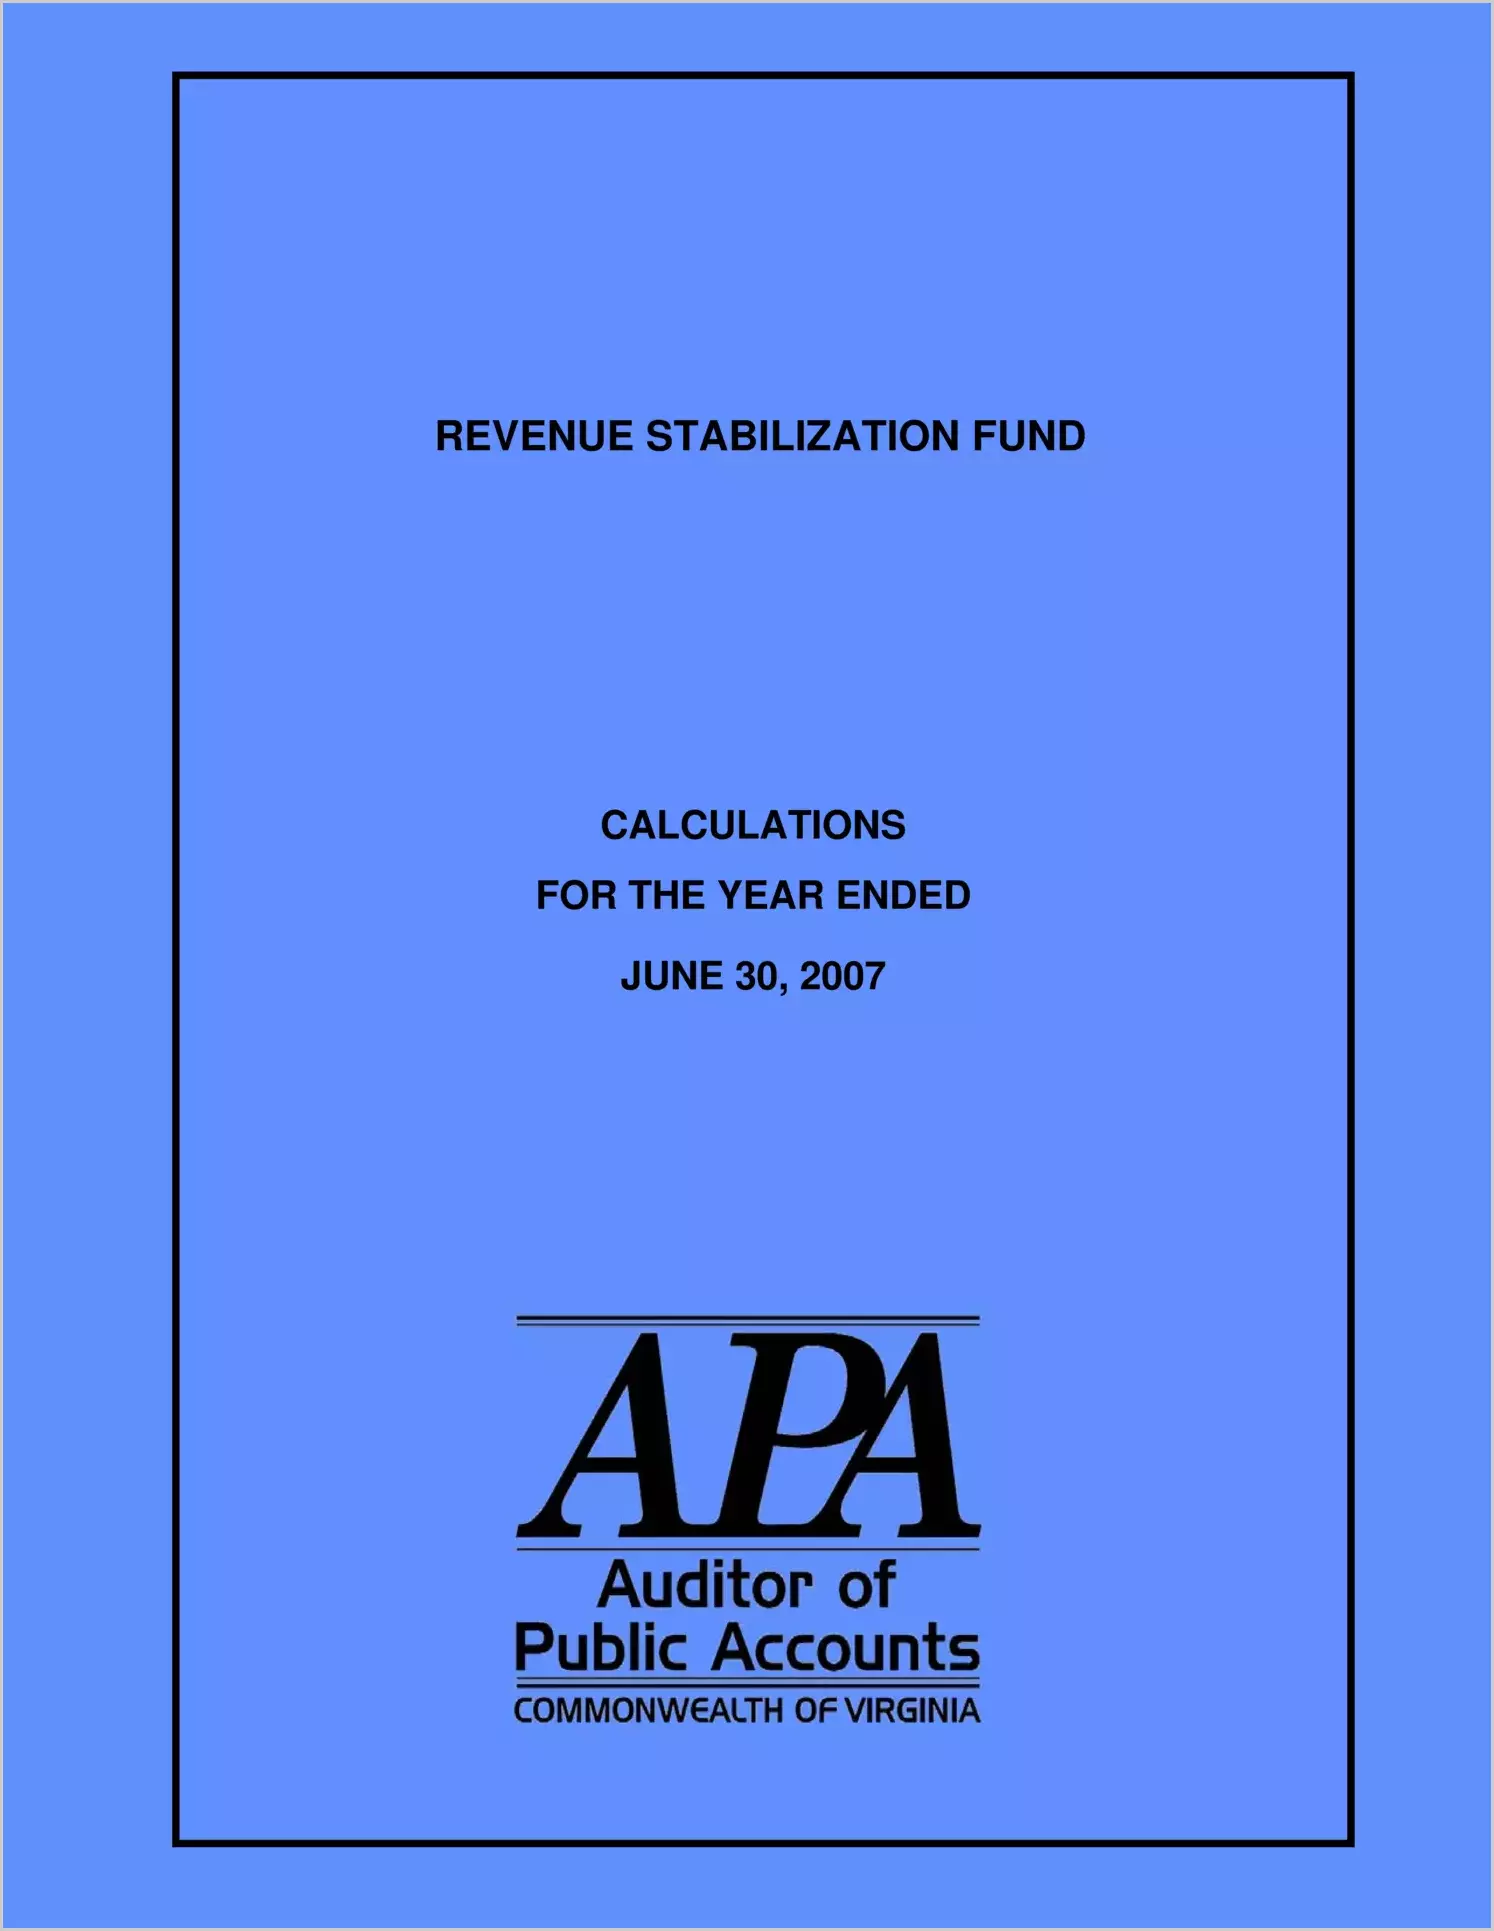 Revenue Stabilization Fund Calculations for the year ended June 30, 2007